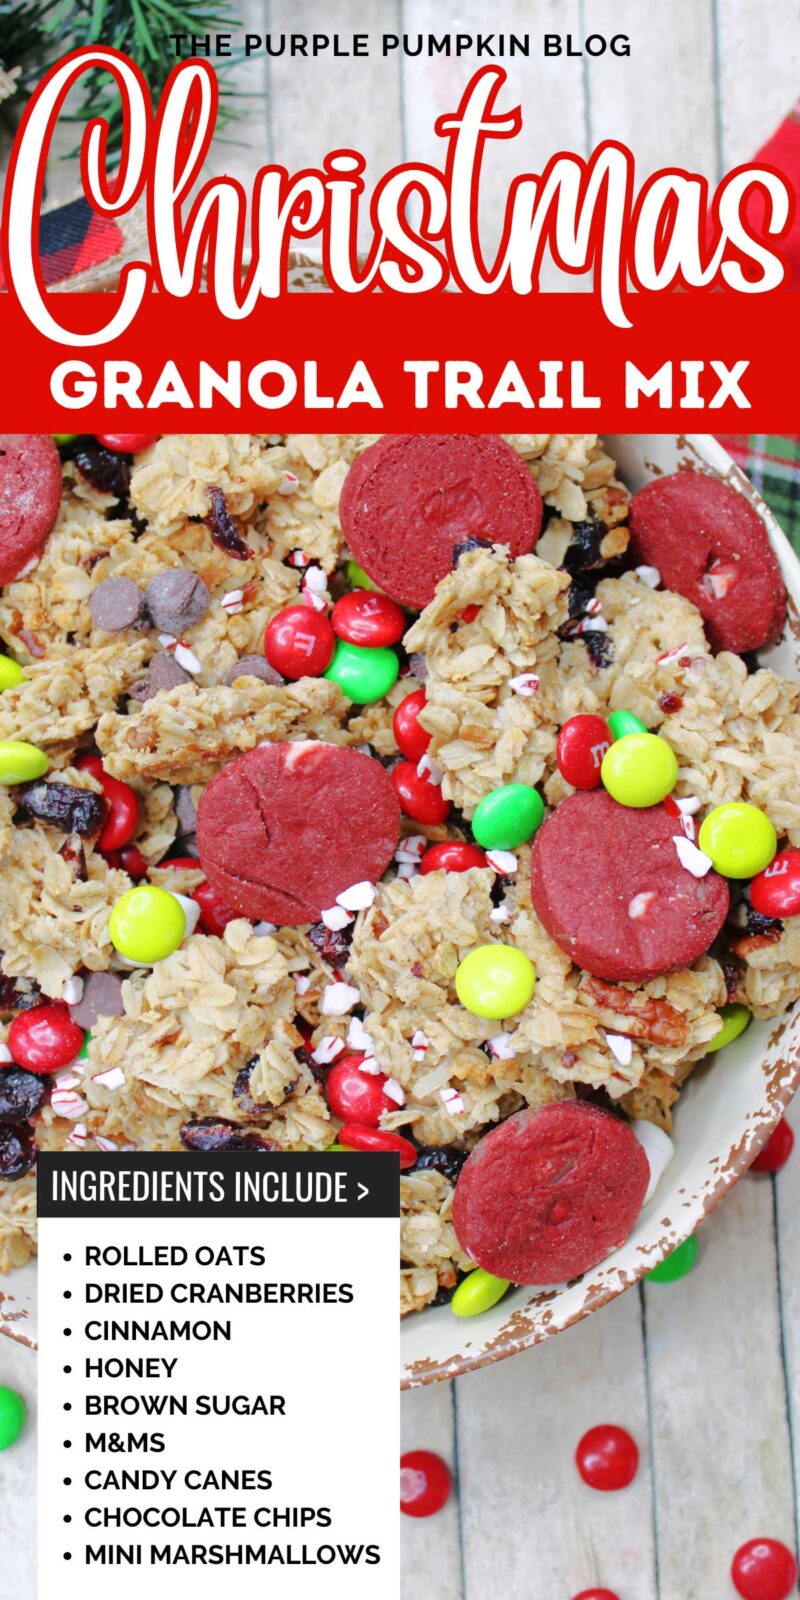 A bowl filled with homemade granola, red velvet cookies, M&Ms candies, chocolate chips, and crushed candy canes.